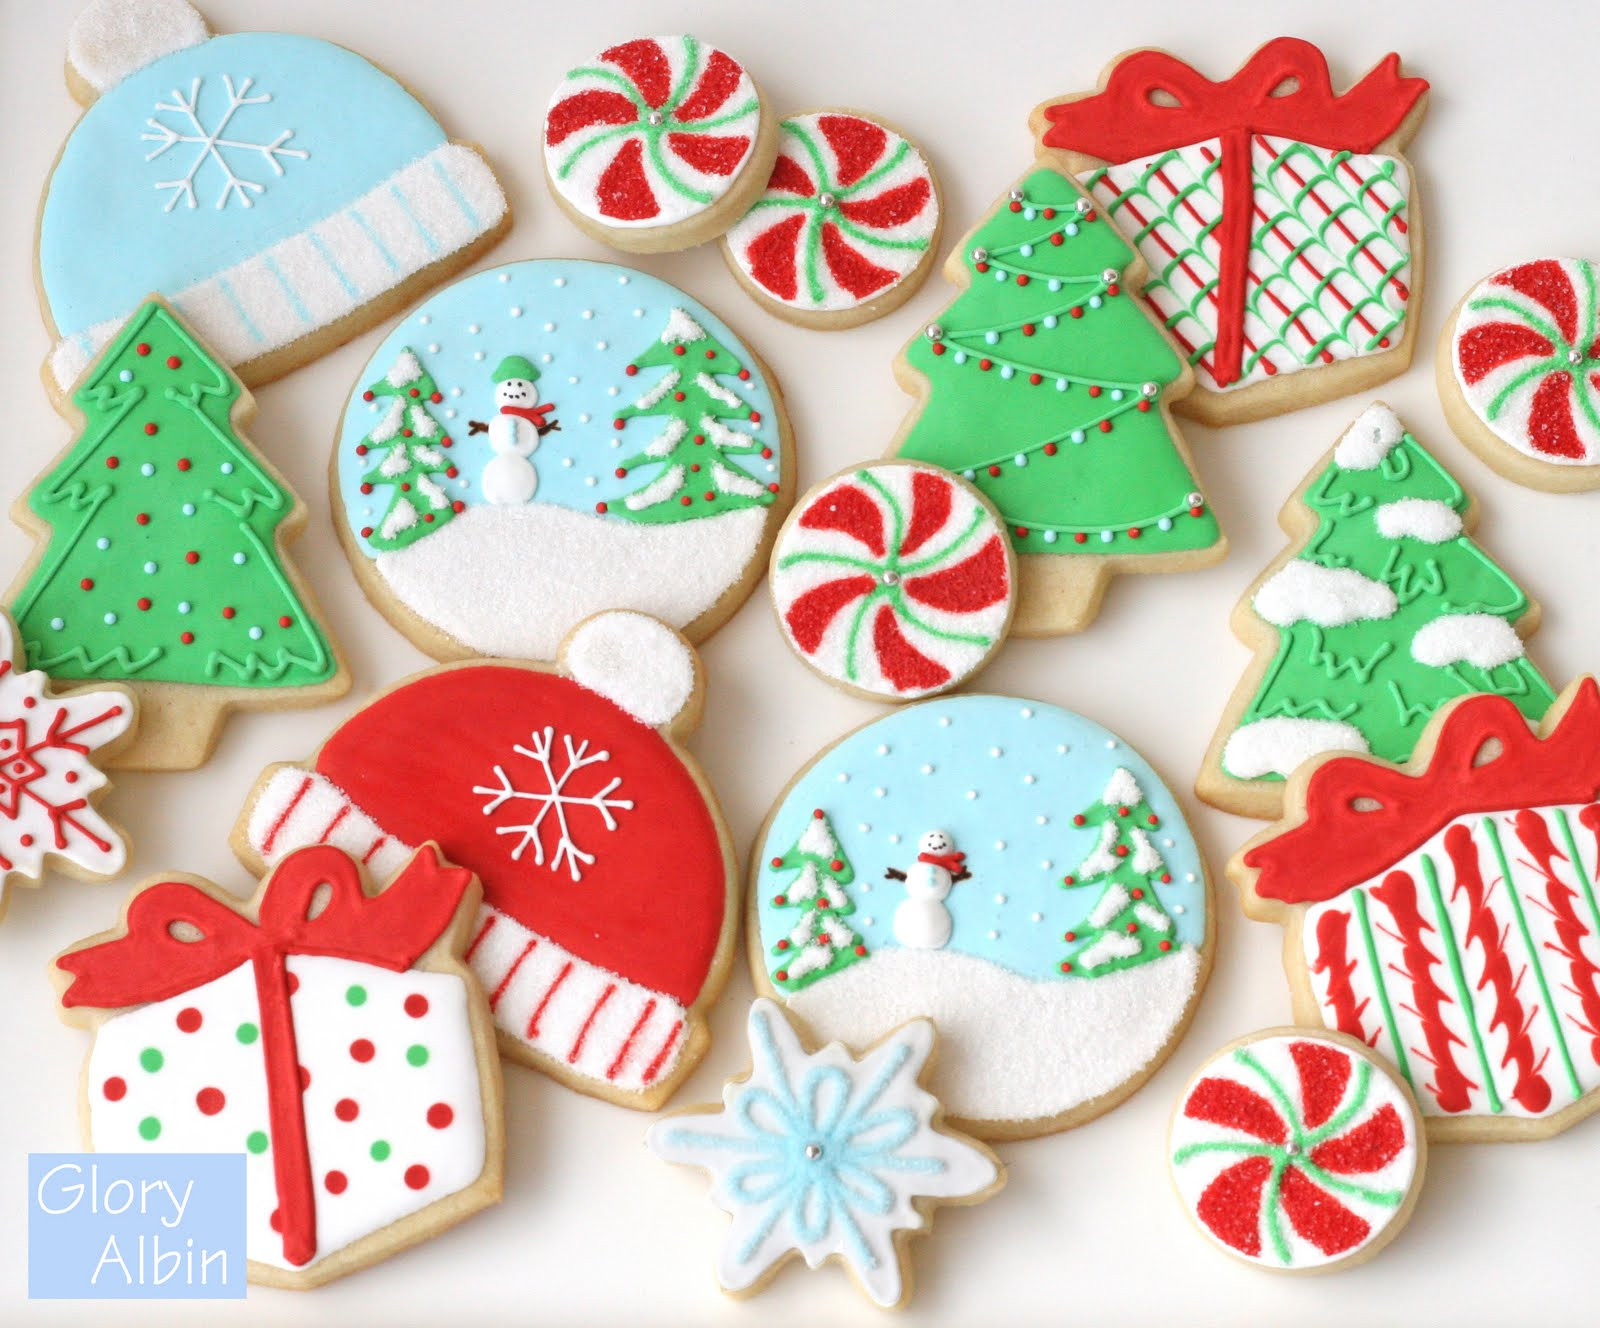 Decorating Christmas Cookies With Royal Icing
 Decorating Sugar Cookies with Royal Icing – Glorious Treats